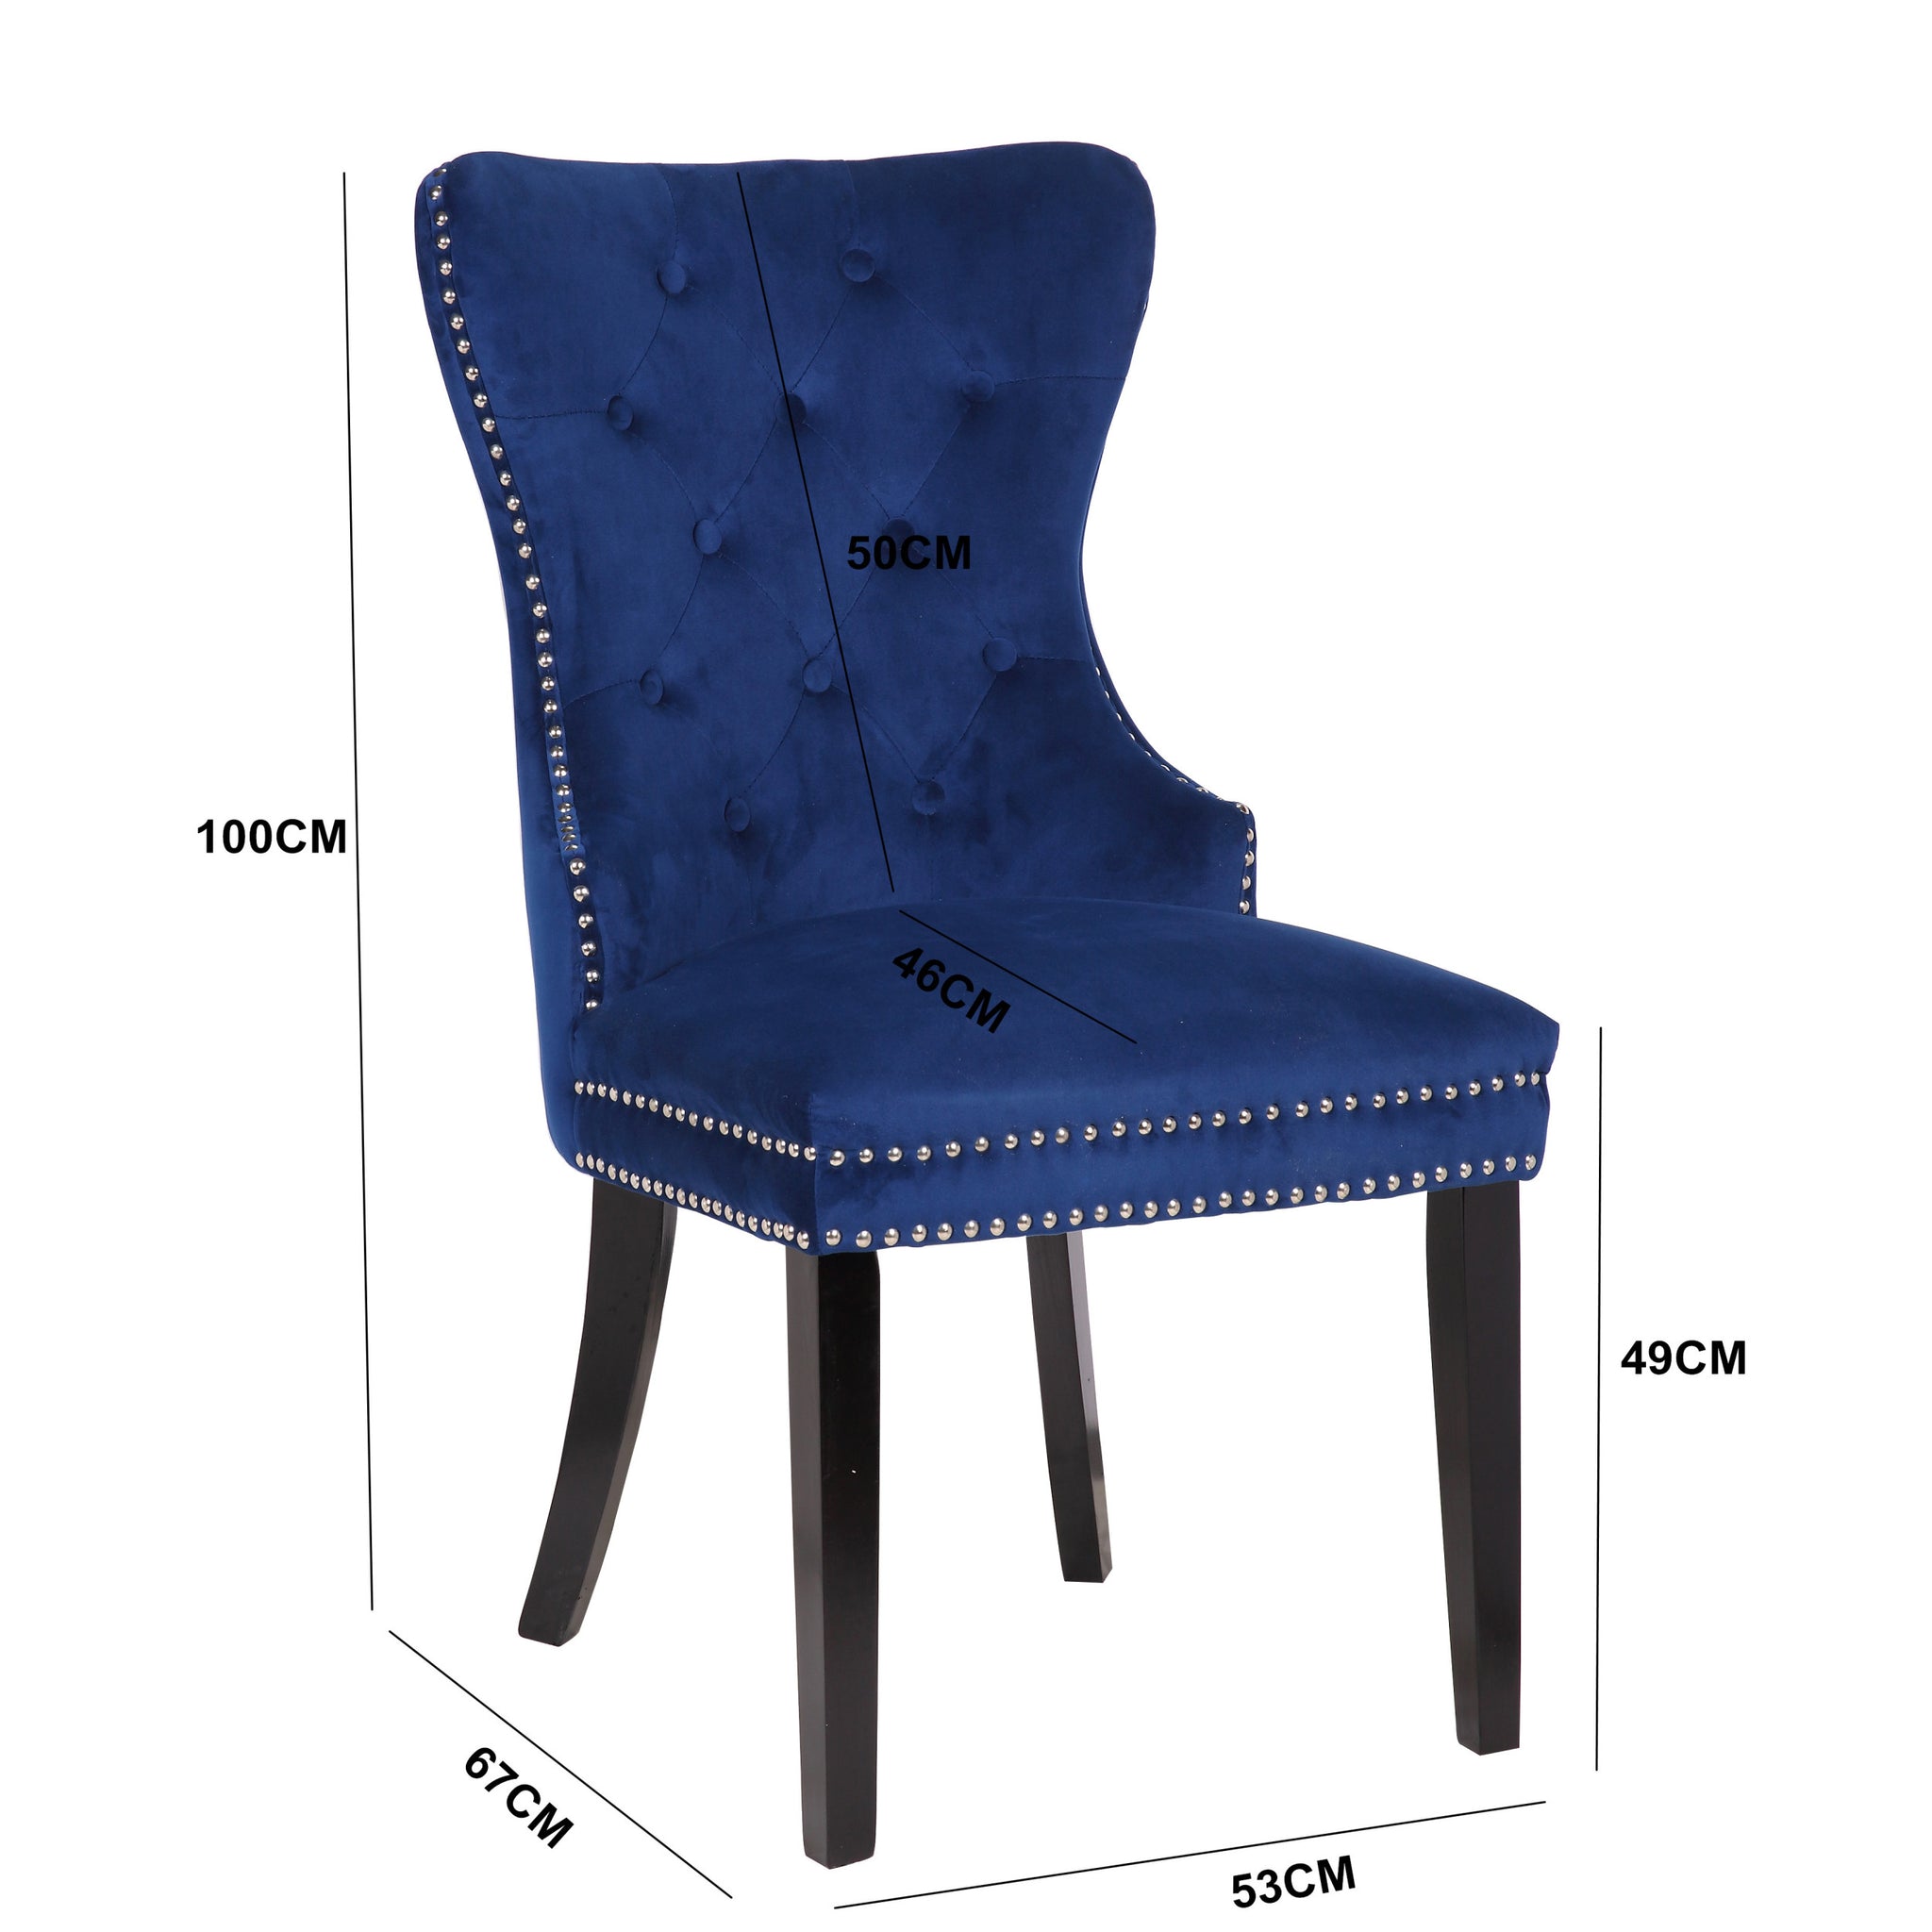 Erica 2 Piece Stainless Steel Legs Chair Finish with acacia wood-navy-primary living